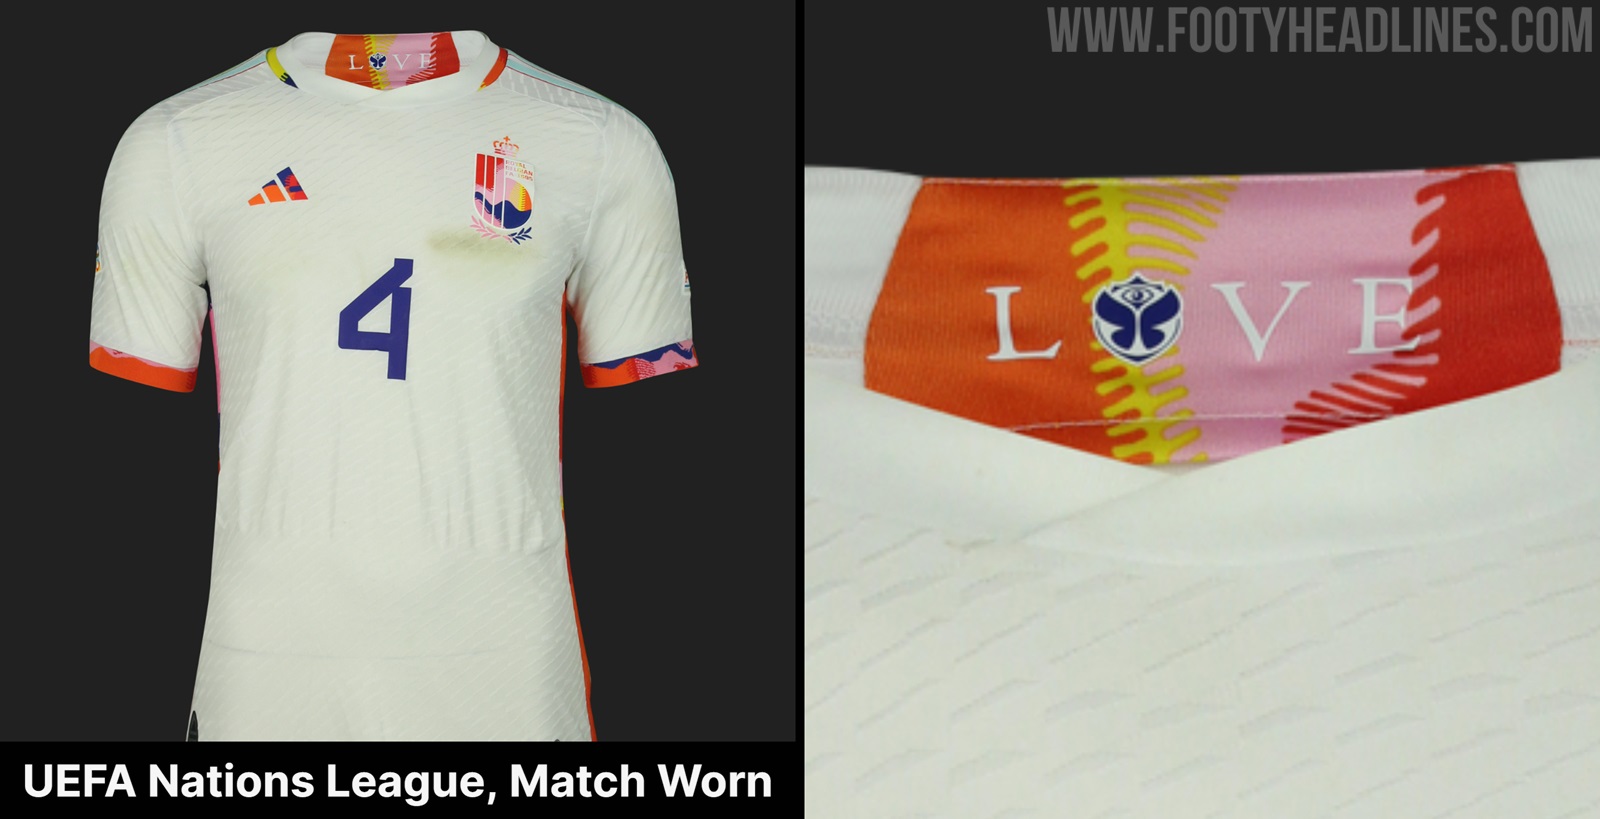 FIFA forces Belgium to remove word 'Love' from second World Cup shirt